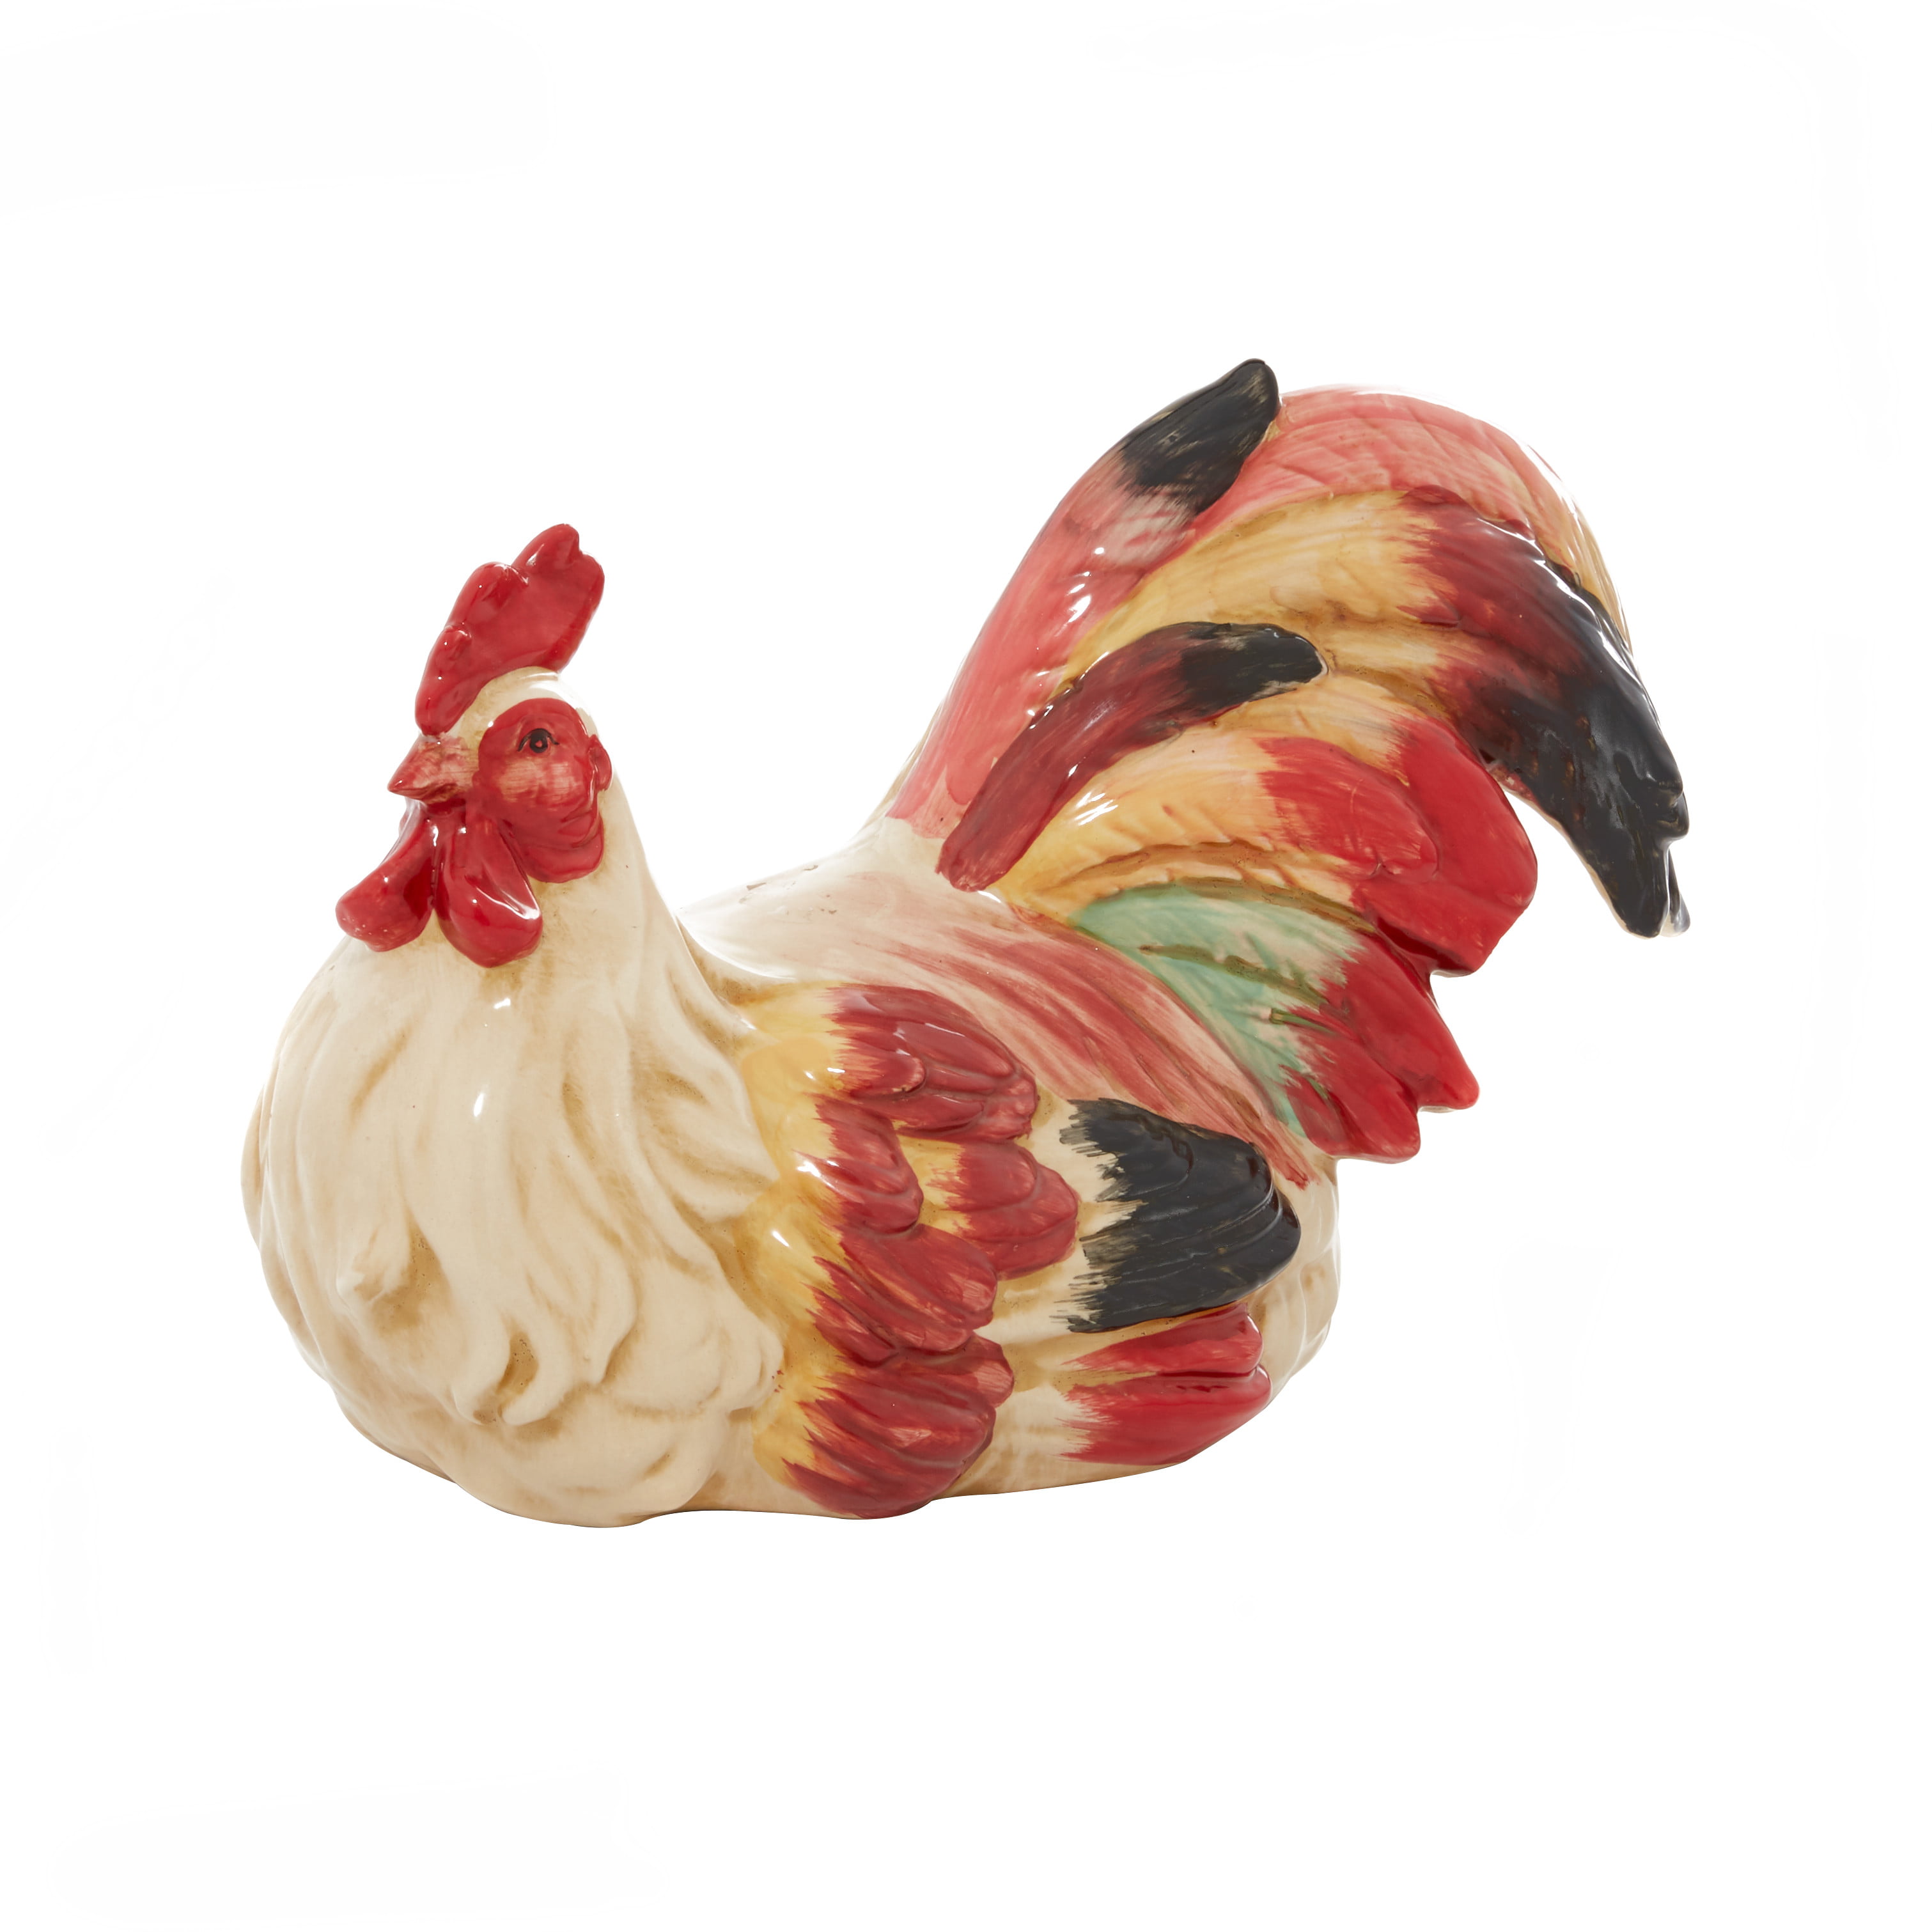 Country Ceramic Rooster Planter Vintage Rooster planter Rooster Collector, Rooster pencil holder Farmhouse Decor Country Living Decor